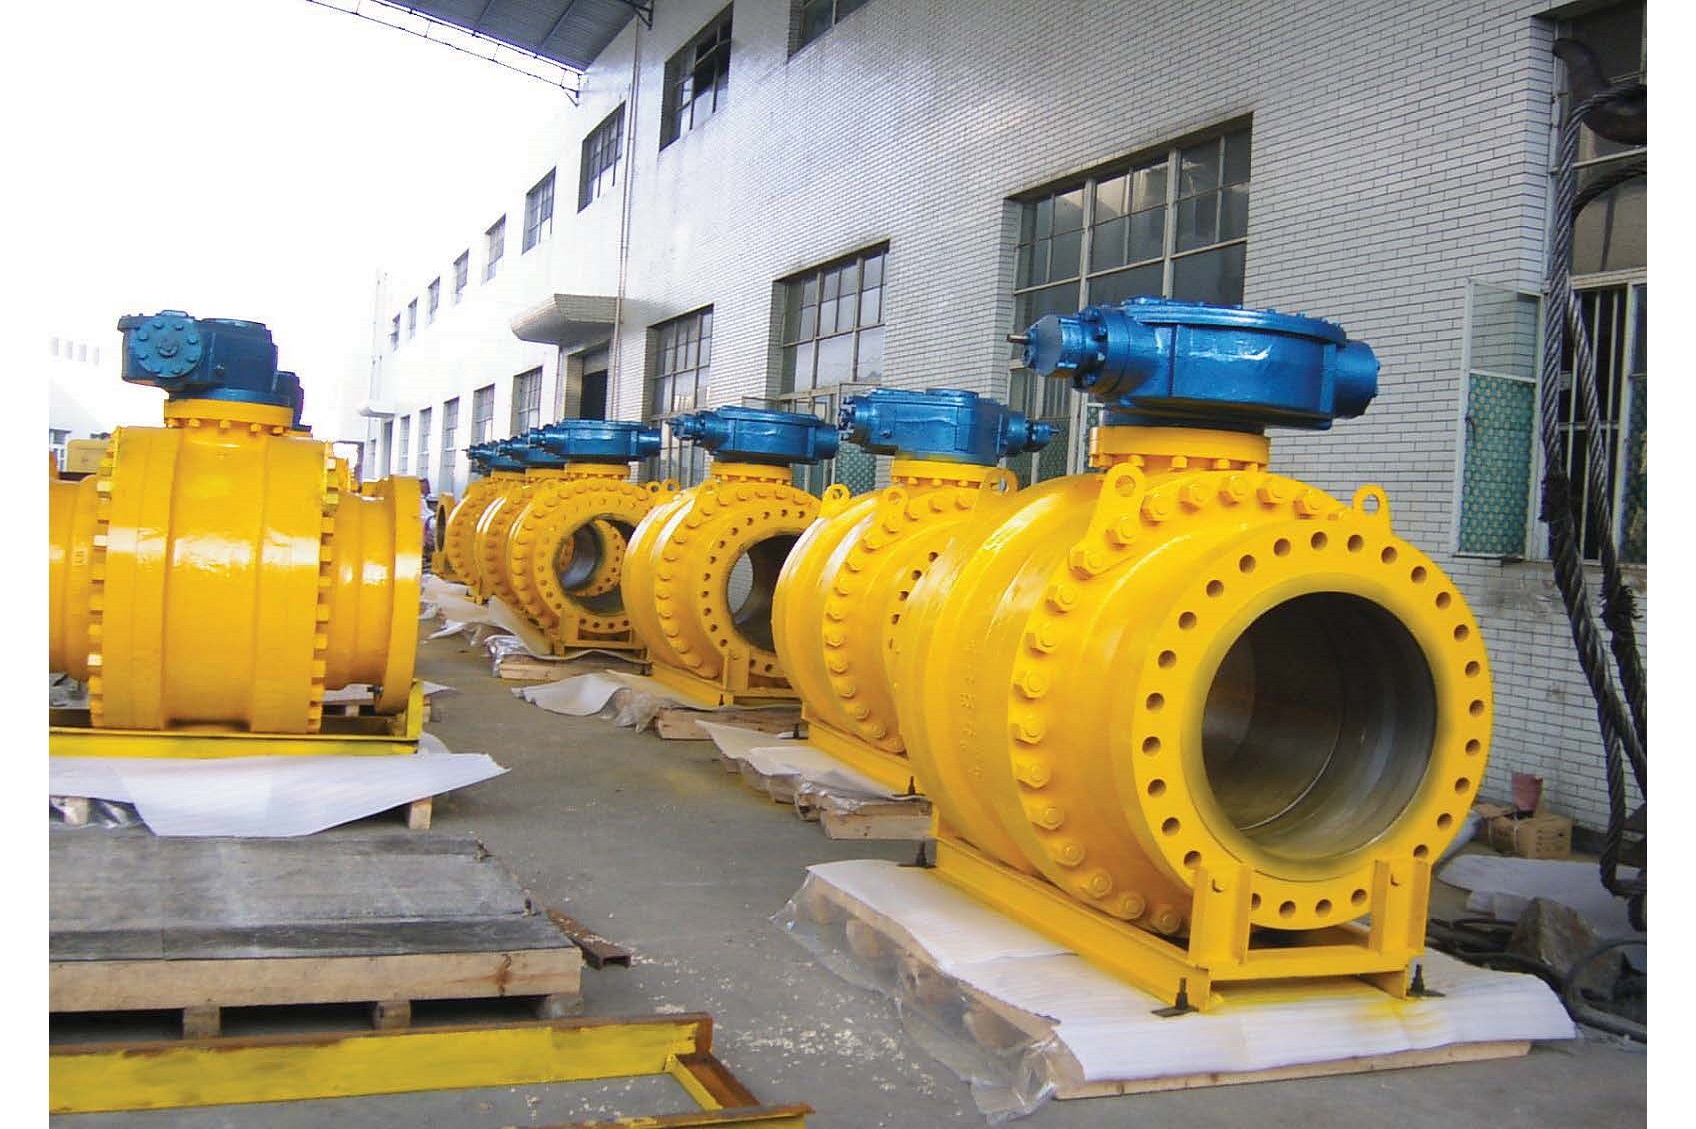 Industrial valve suppliers ready to deliver huge valves painted in yellow and blue in the workshop